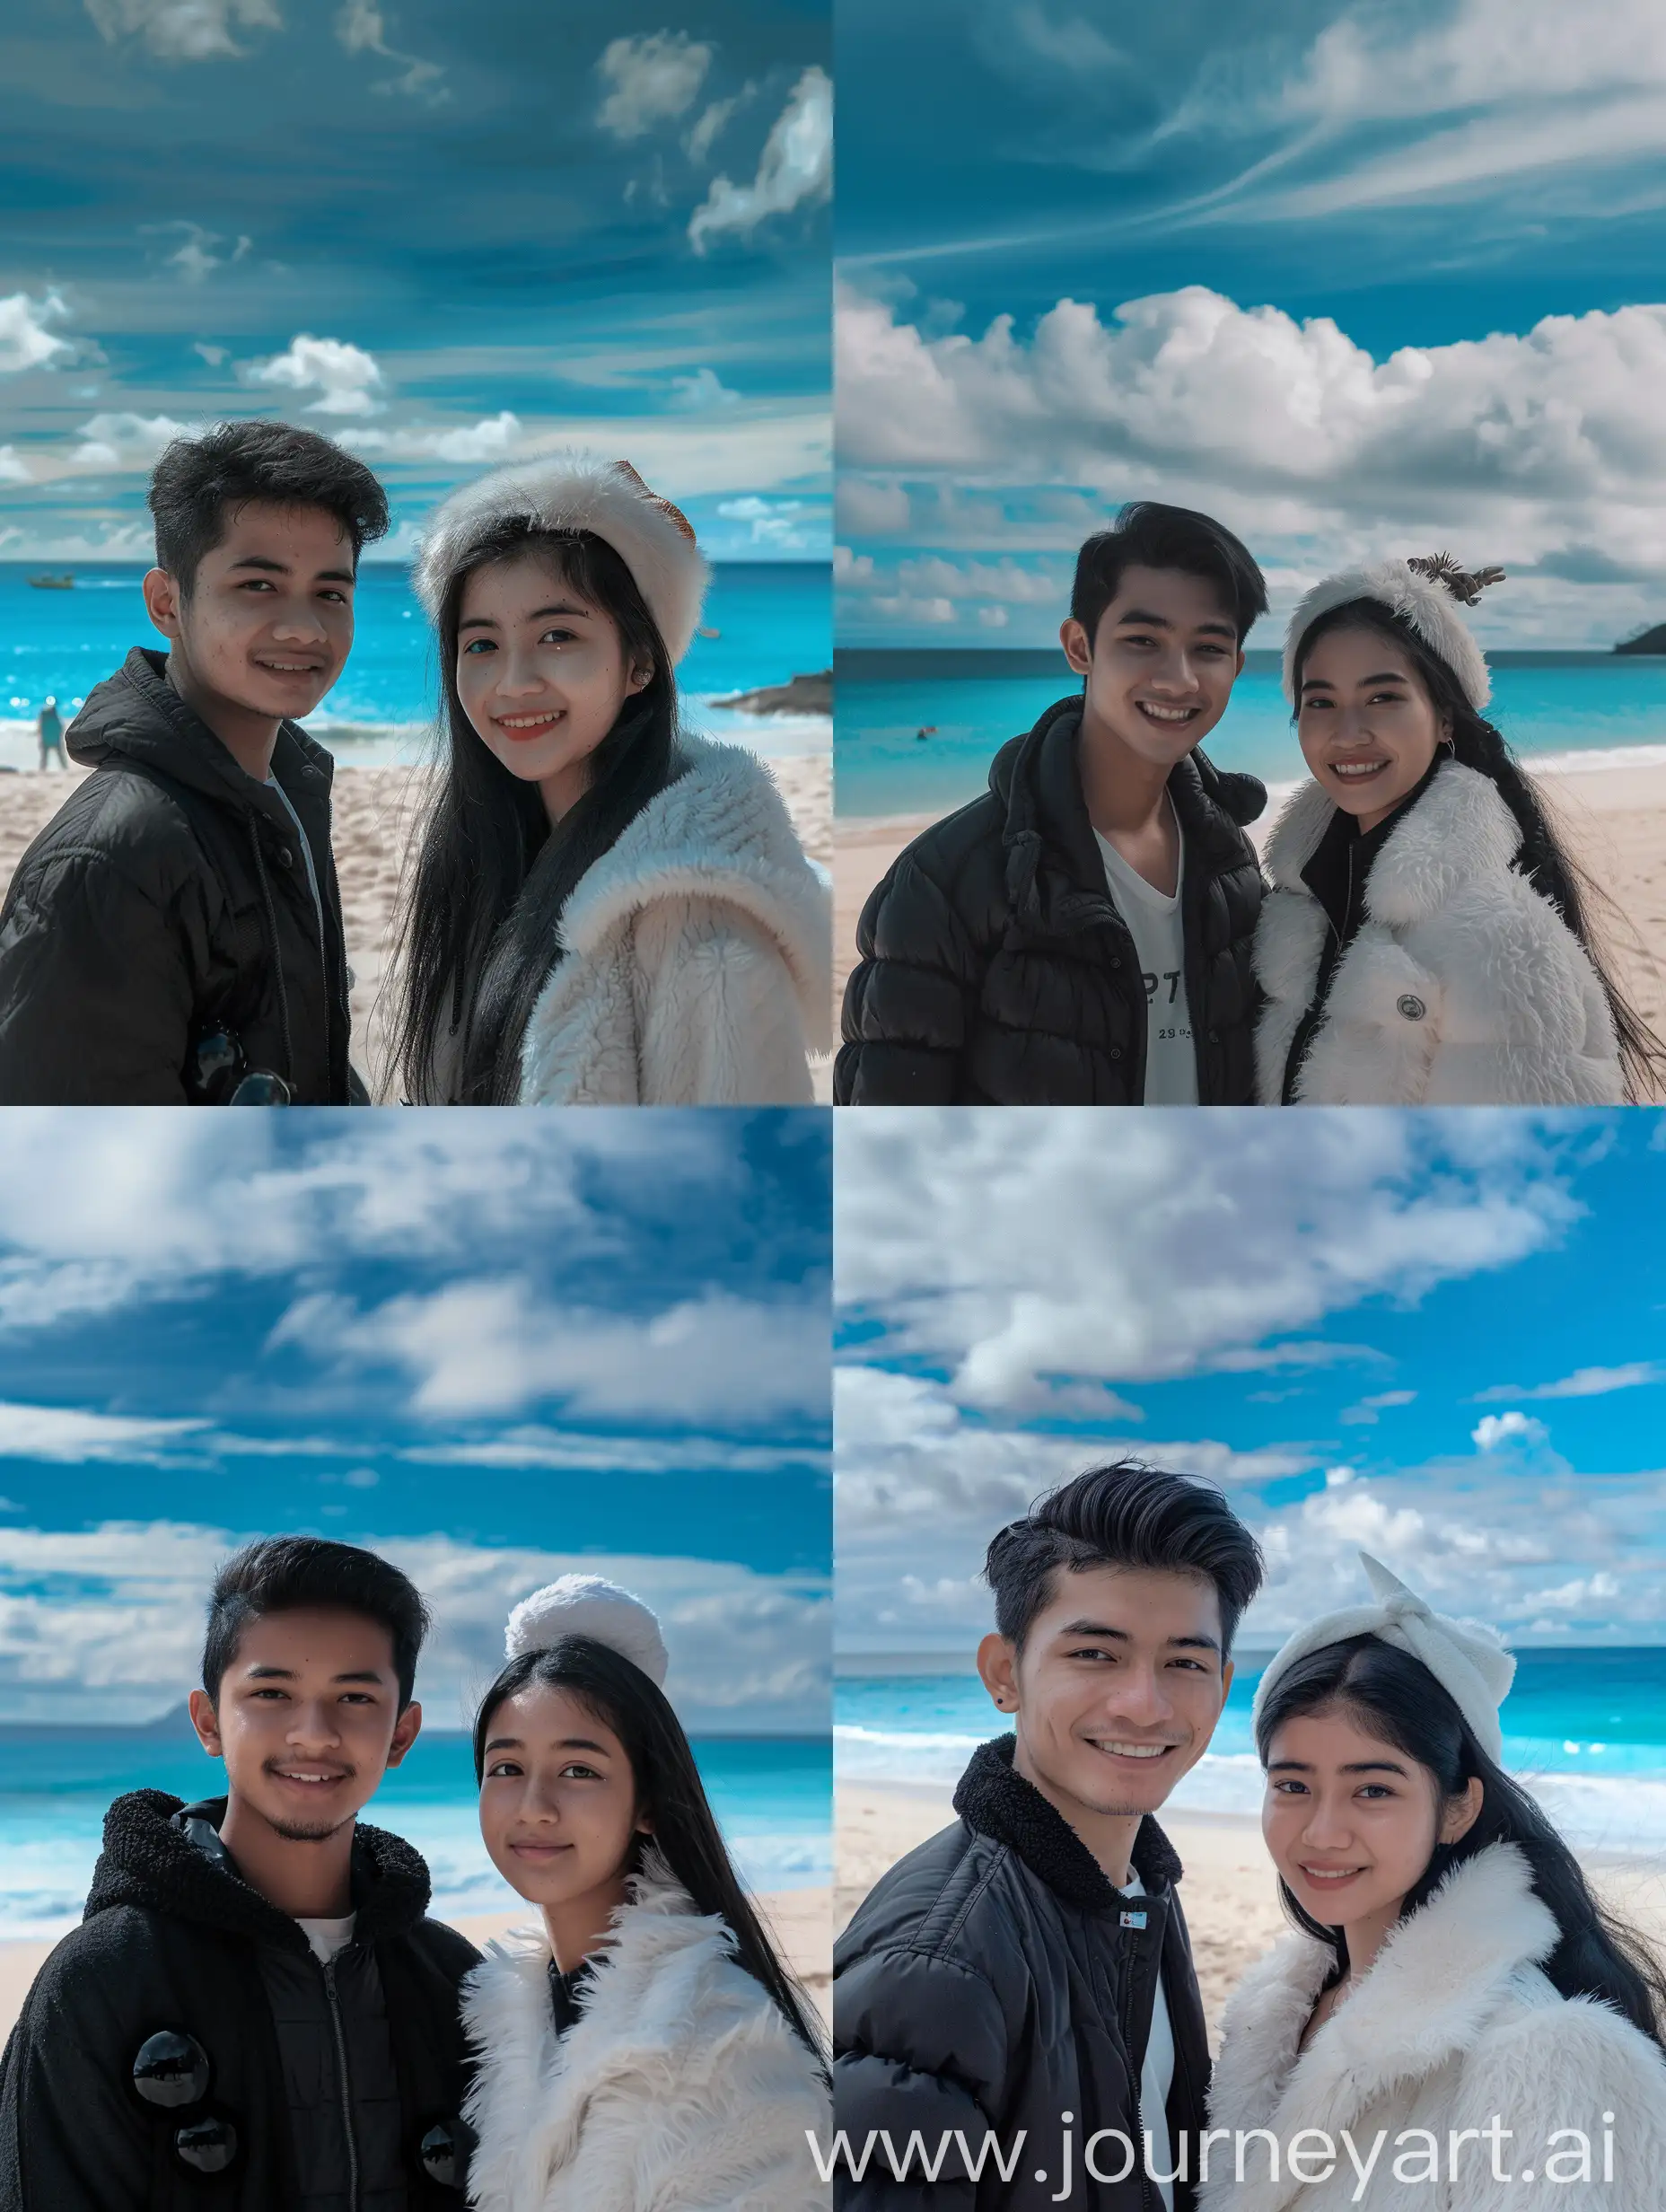 (8K, RAW Photo, Photography, Photorealistic, Realistic, Highest Quality, Intricate Detail), Medium photo of 25 year old Indonesian man, fit, ideal body, oval face, white skin, natural skin, cool short black hair, wearing a black jacket bubble hairy, side by side with a 25 year old Indonesian woman with long black hair, a white furry jacket, a ciput on her head, they smile facing the camera, their eyes look at the camera, the corners of their eyes are parallel to the view on the beach. Near the sand beach there is a blue sea with beautiful blue clouds